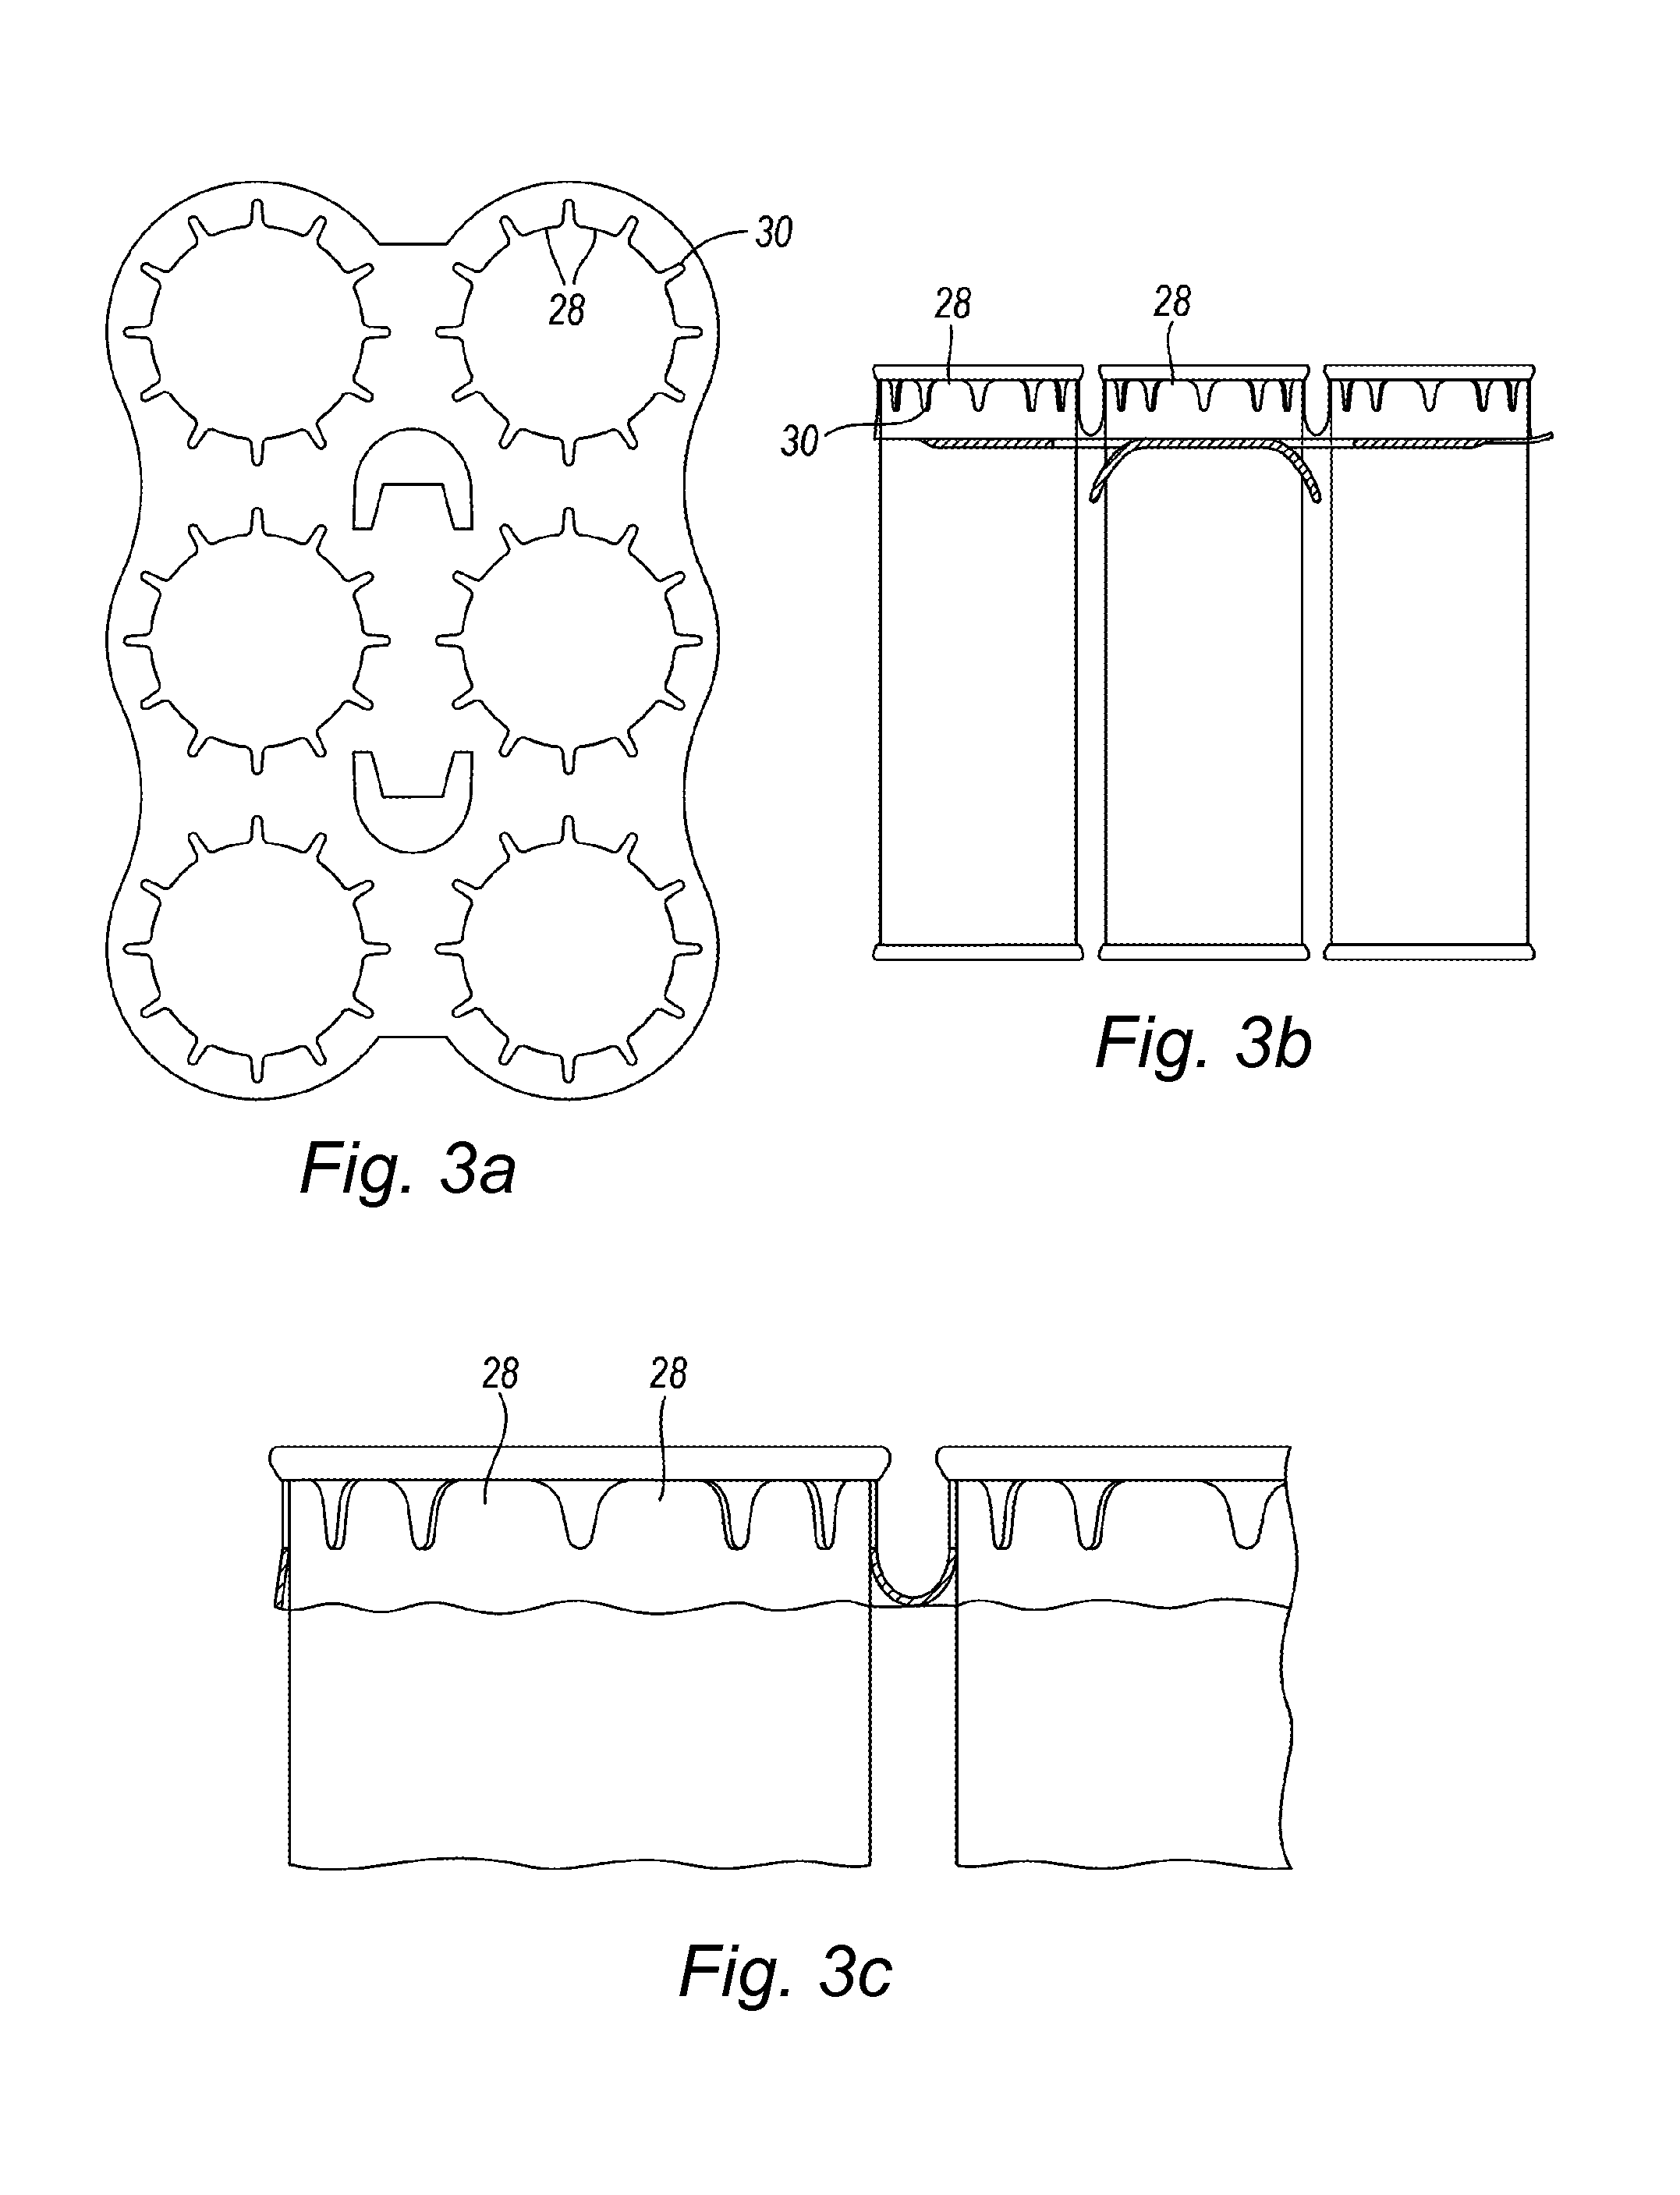 Machine and system for applying container carriers to containers